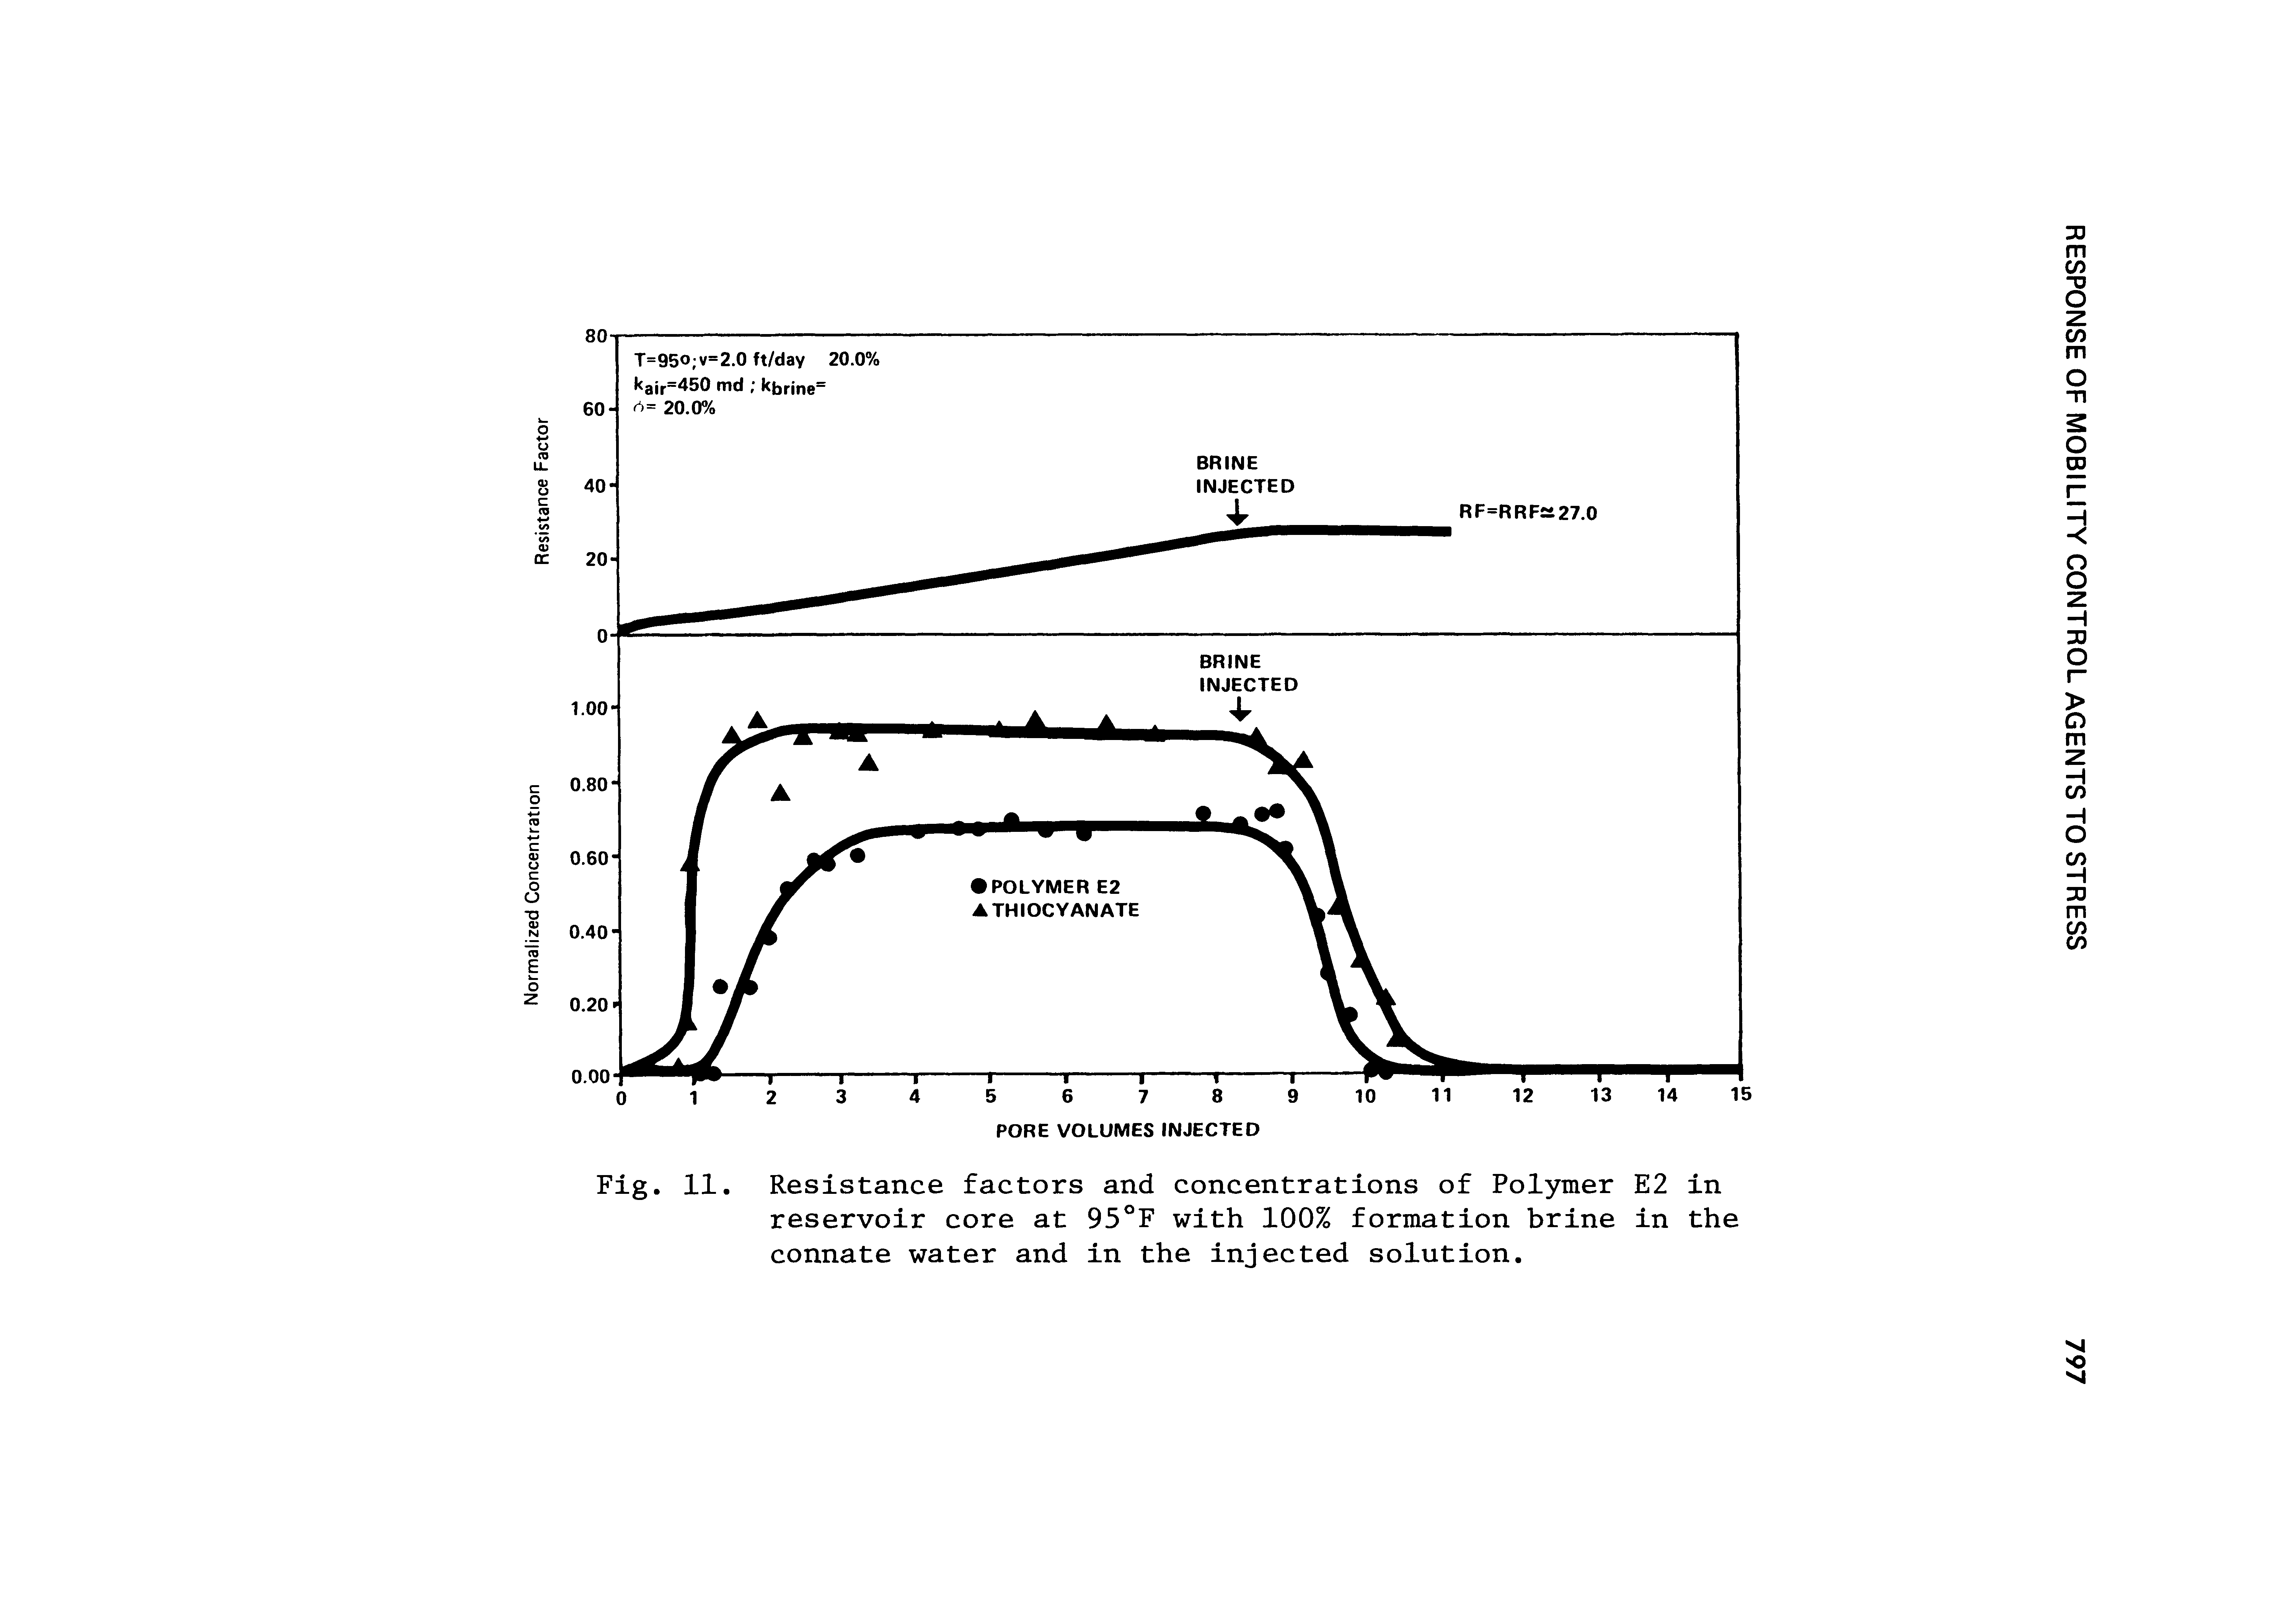 Fig. 11. Resistance factors and concentrations of Polymer E2 in reservoir core at 95°F with 100% formation brine in the connate water and in the injected solution.